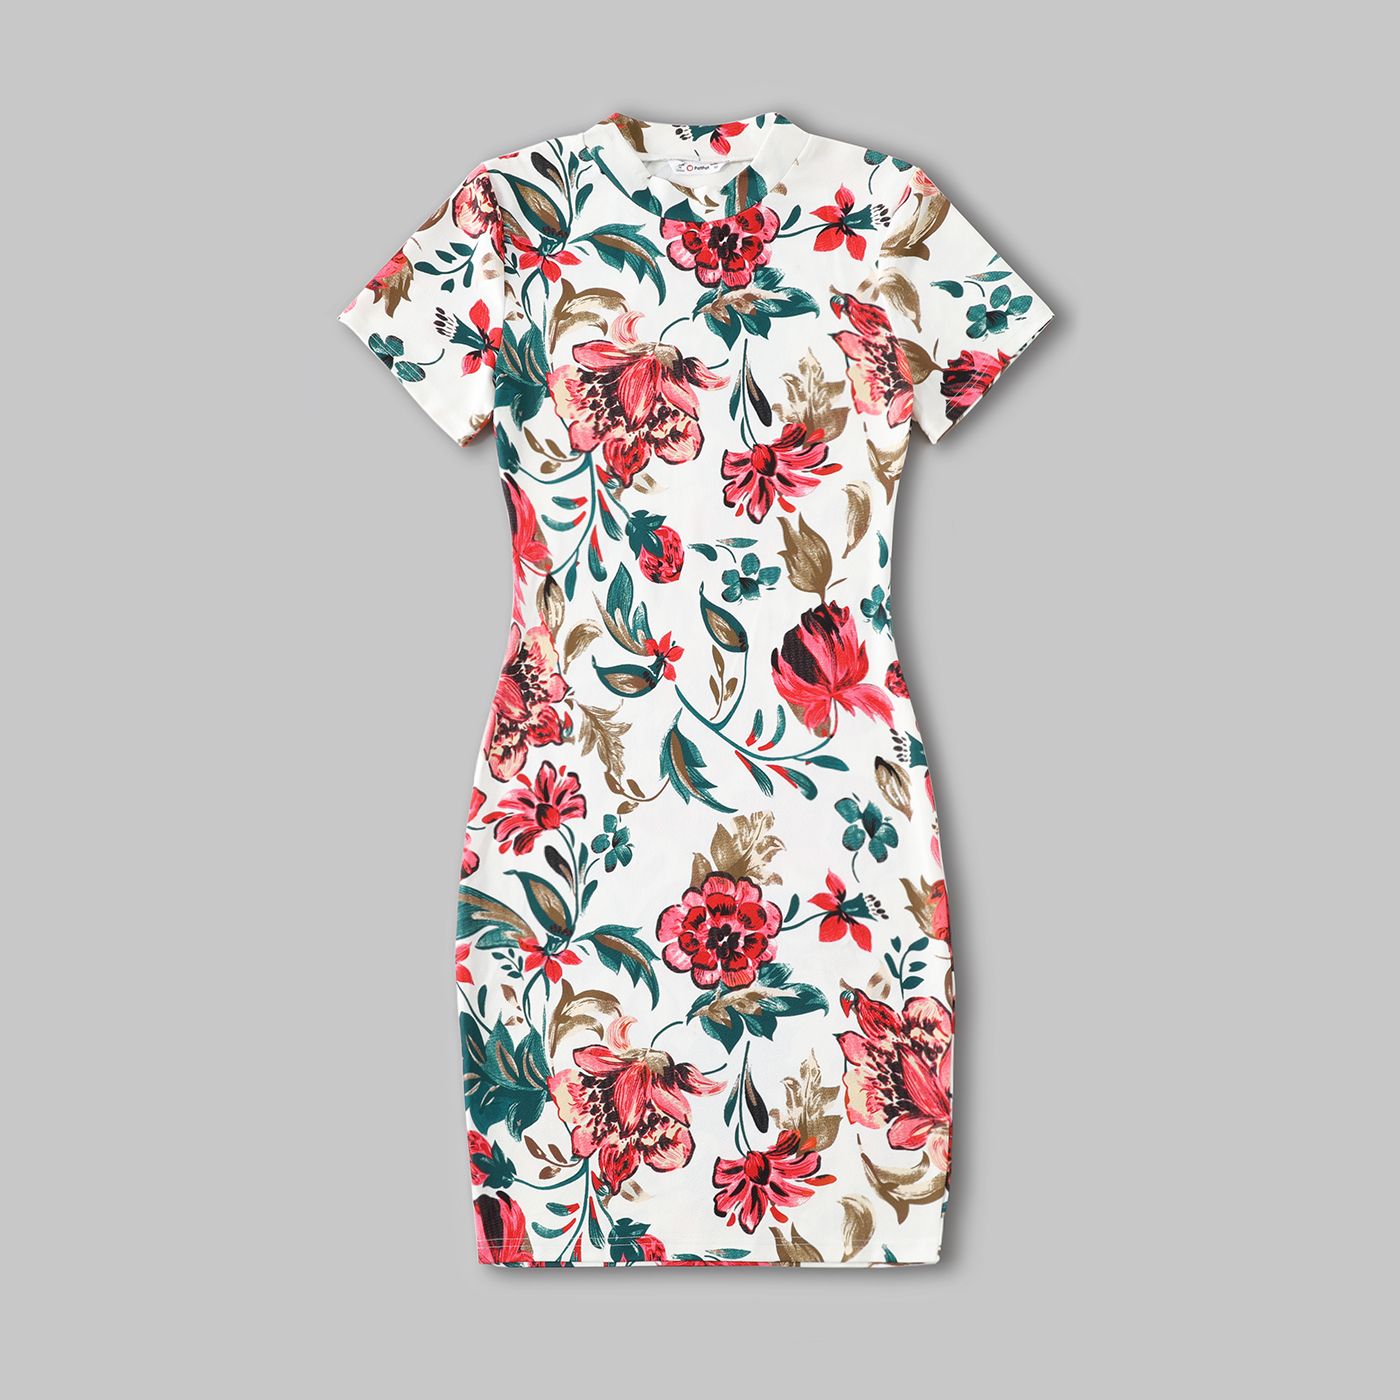 Family Matching All Over Floral Print Short-sleeve Bodycon Dresses And Colorblock T-shirts Sets